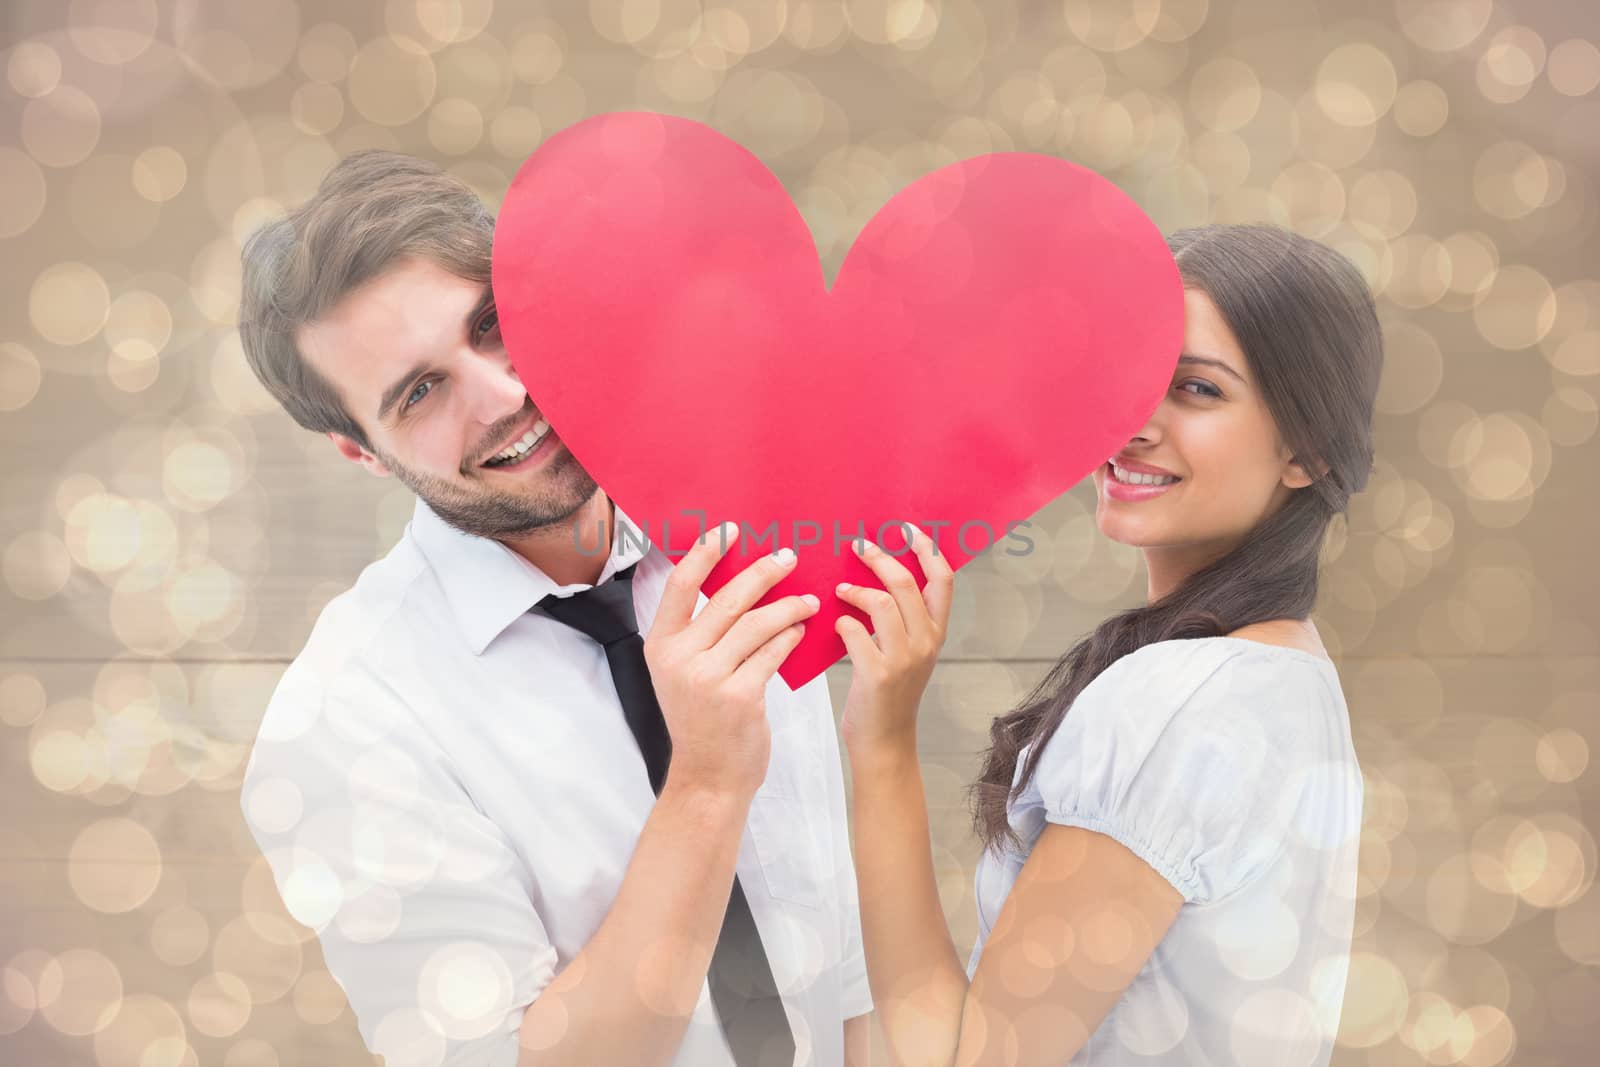 Couple smiling at camera holding a heart against light glowing dots design pattern